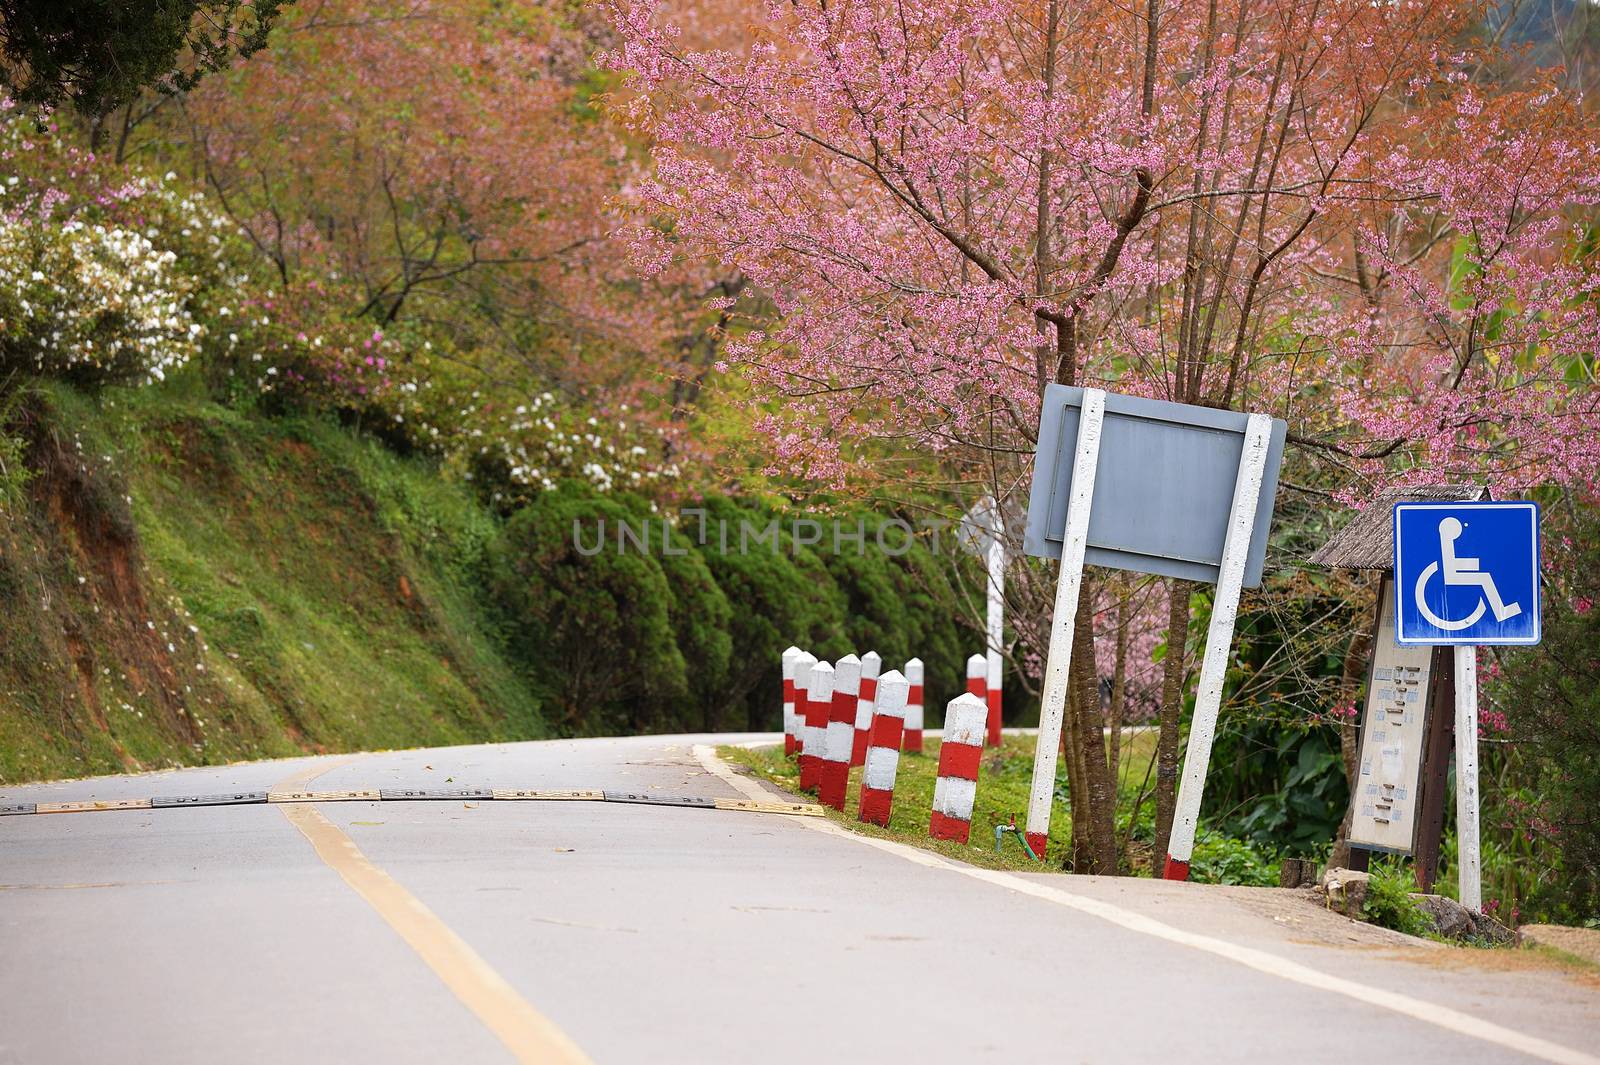 cripple sign on the road with Himalayan Cherry (Prunus cerasoide by think4photop